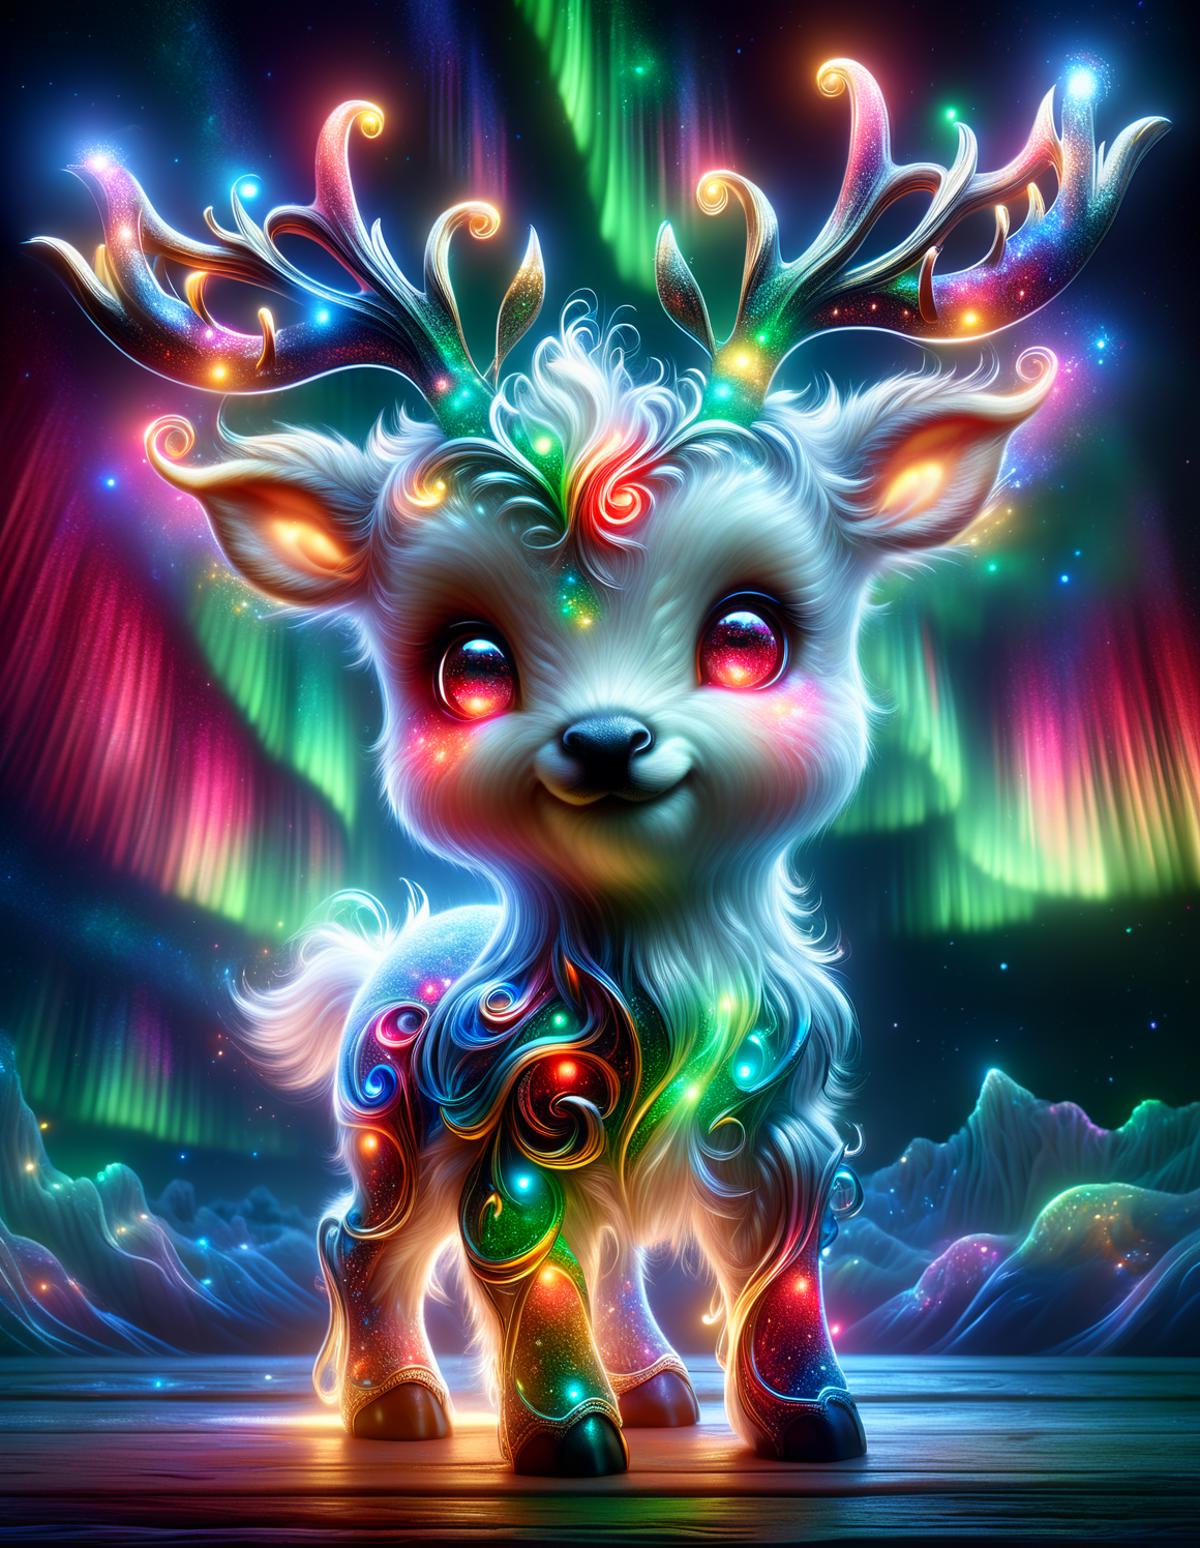 A Colorful and Illuminated Deer with Glowing Eyes, Standing in the Snow.